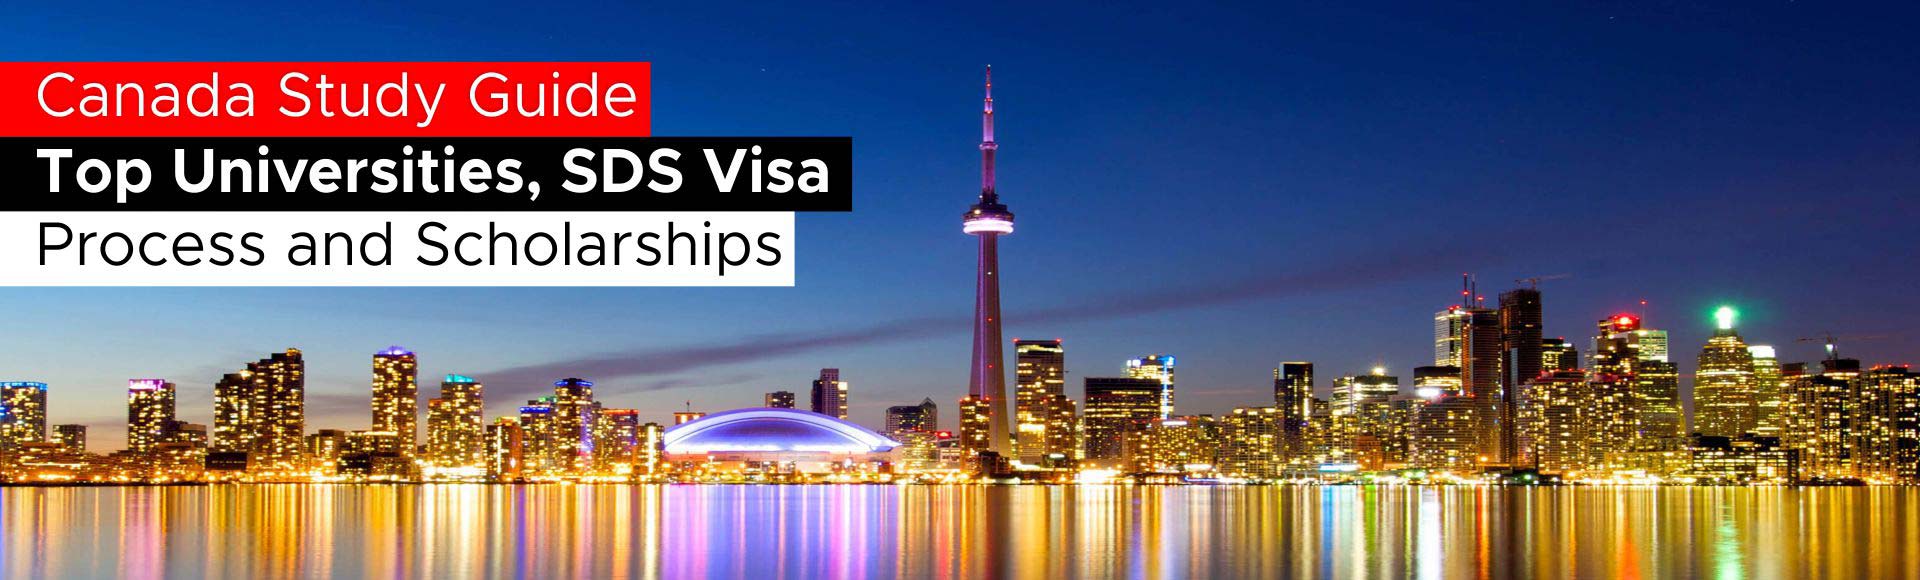 Canada Study Guide: Top Universities, SDS Visa Process and Scholarships